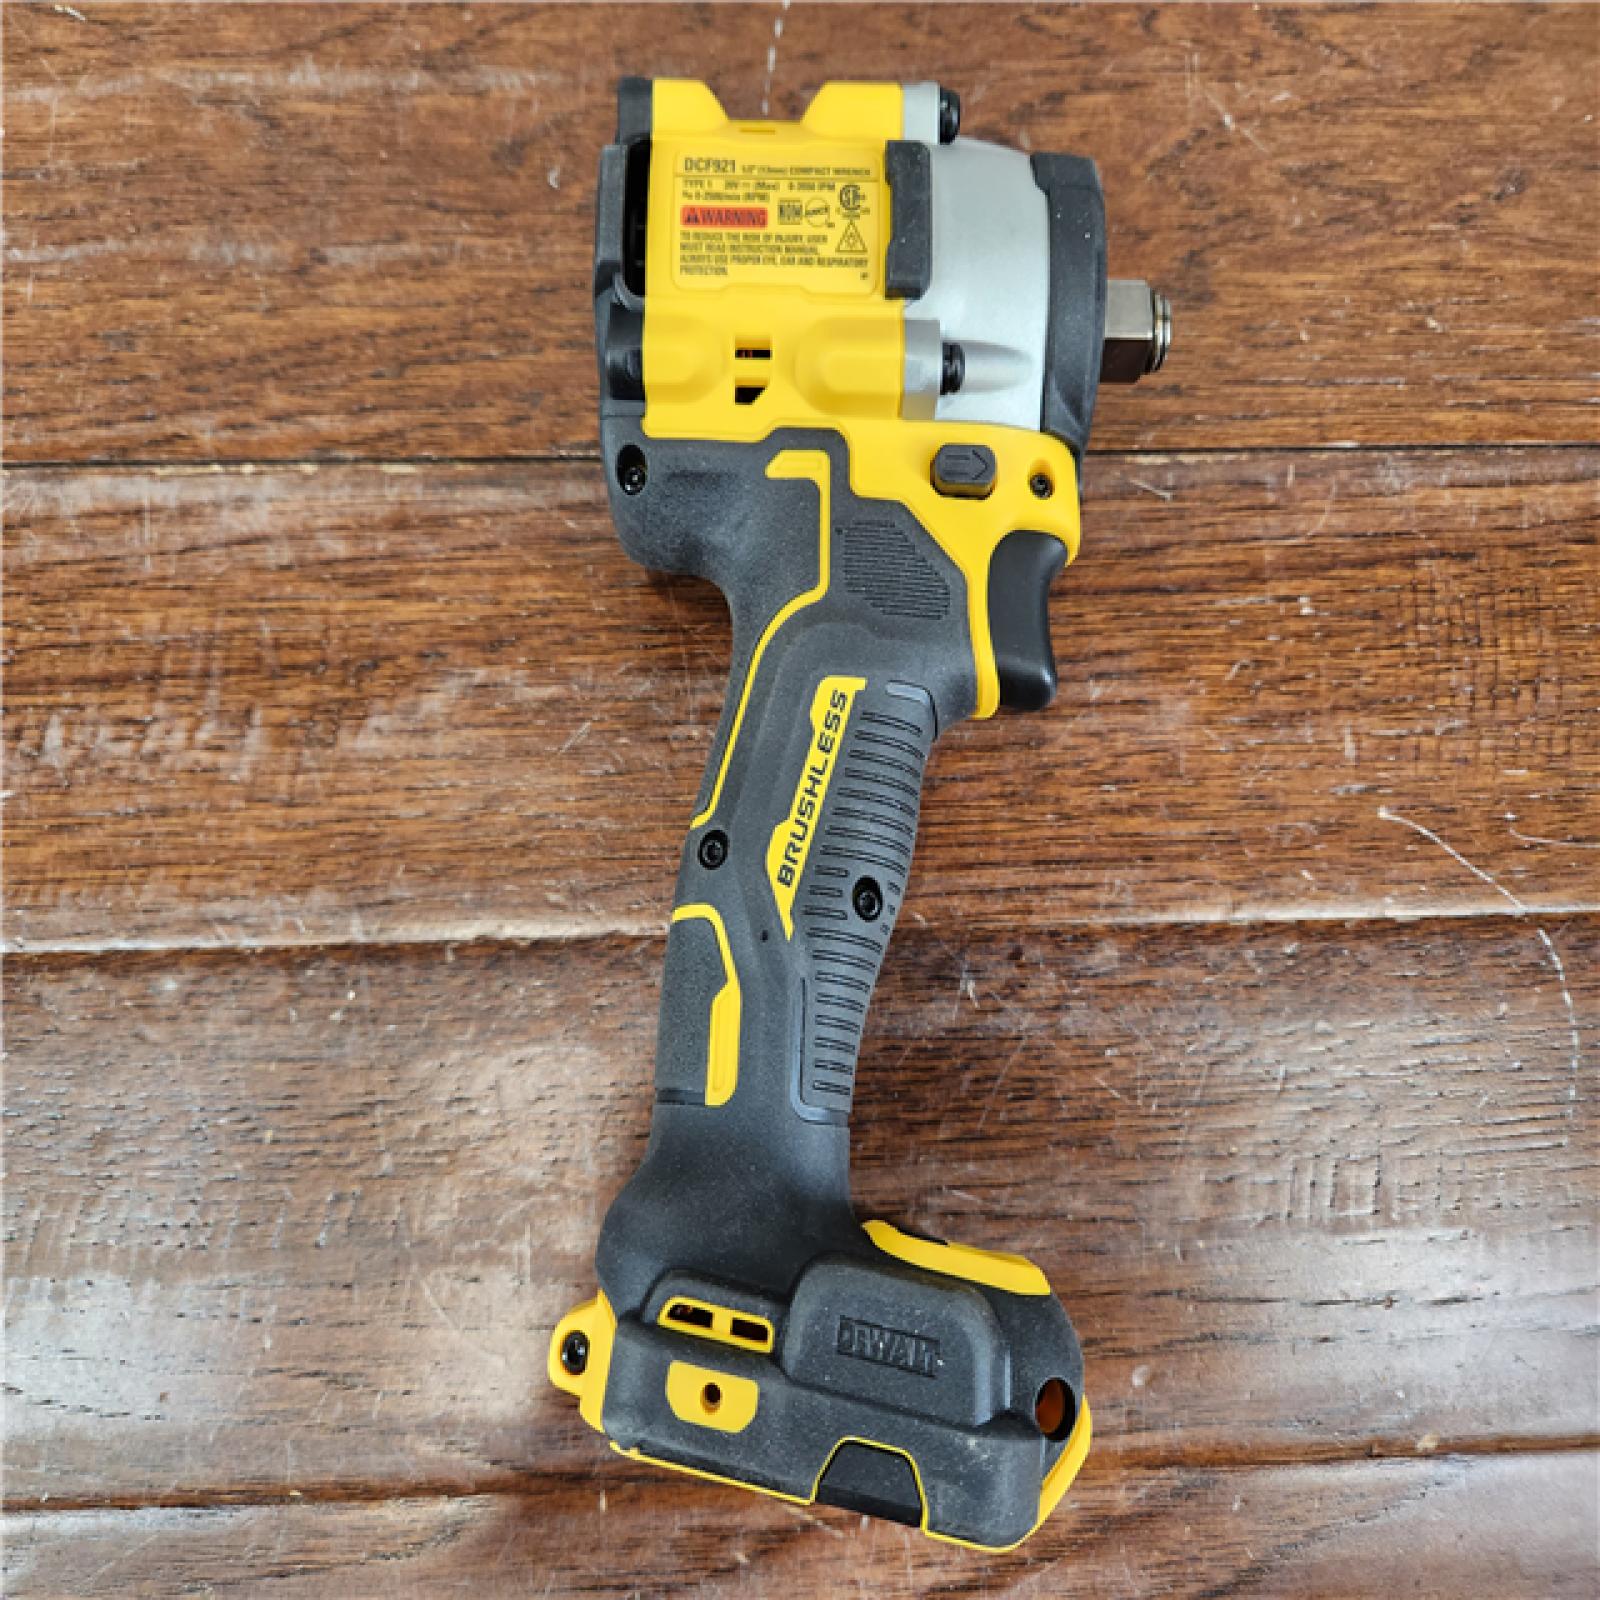 AS-IS DEWALT ATOMIC 20V MAX 1/2 in. Cordless Impact Wrench with Hog Ring Anvil (Tool Only)